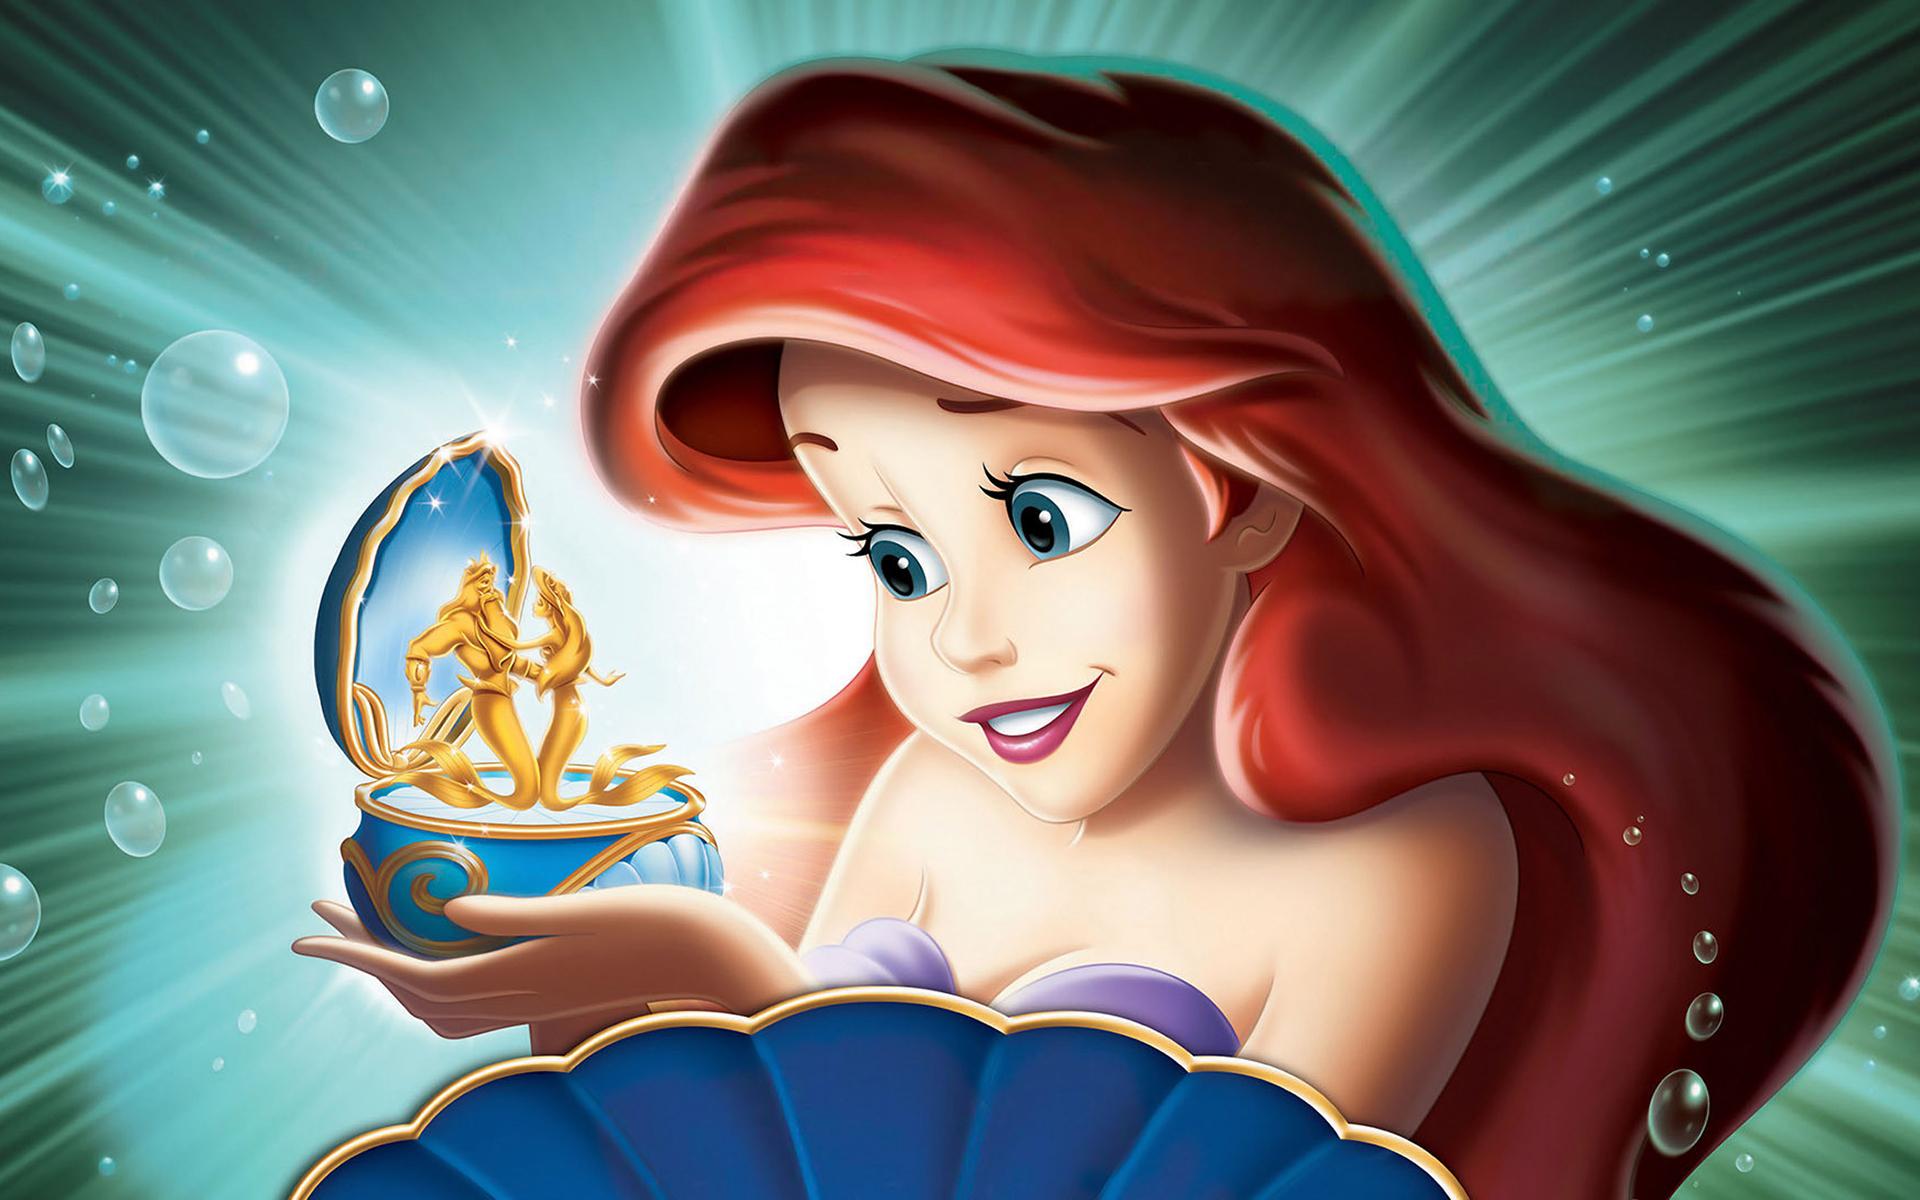 Great Ariel Mermaid Wallpaper Desktop Background of all time The ultimate guide 